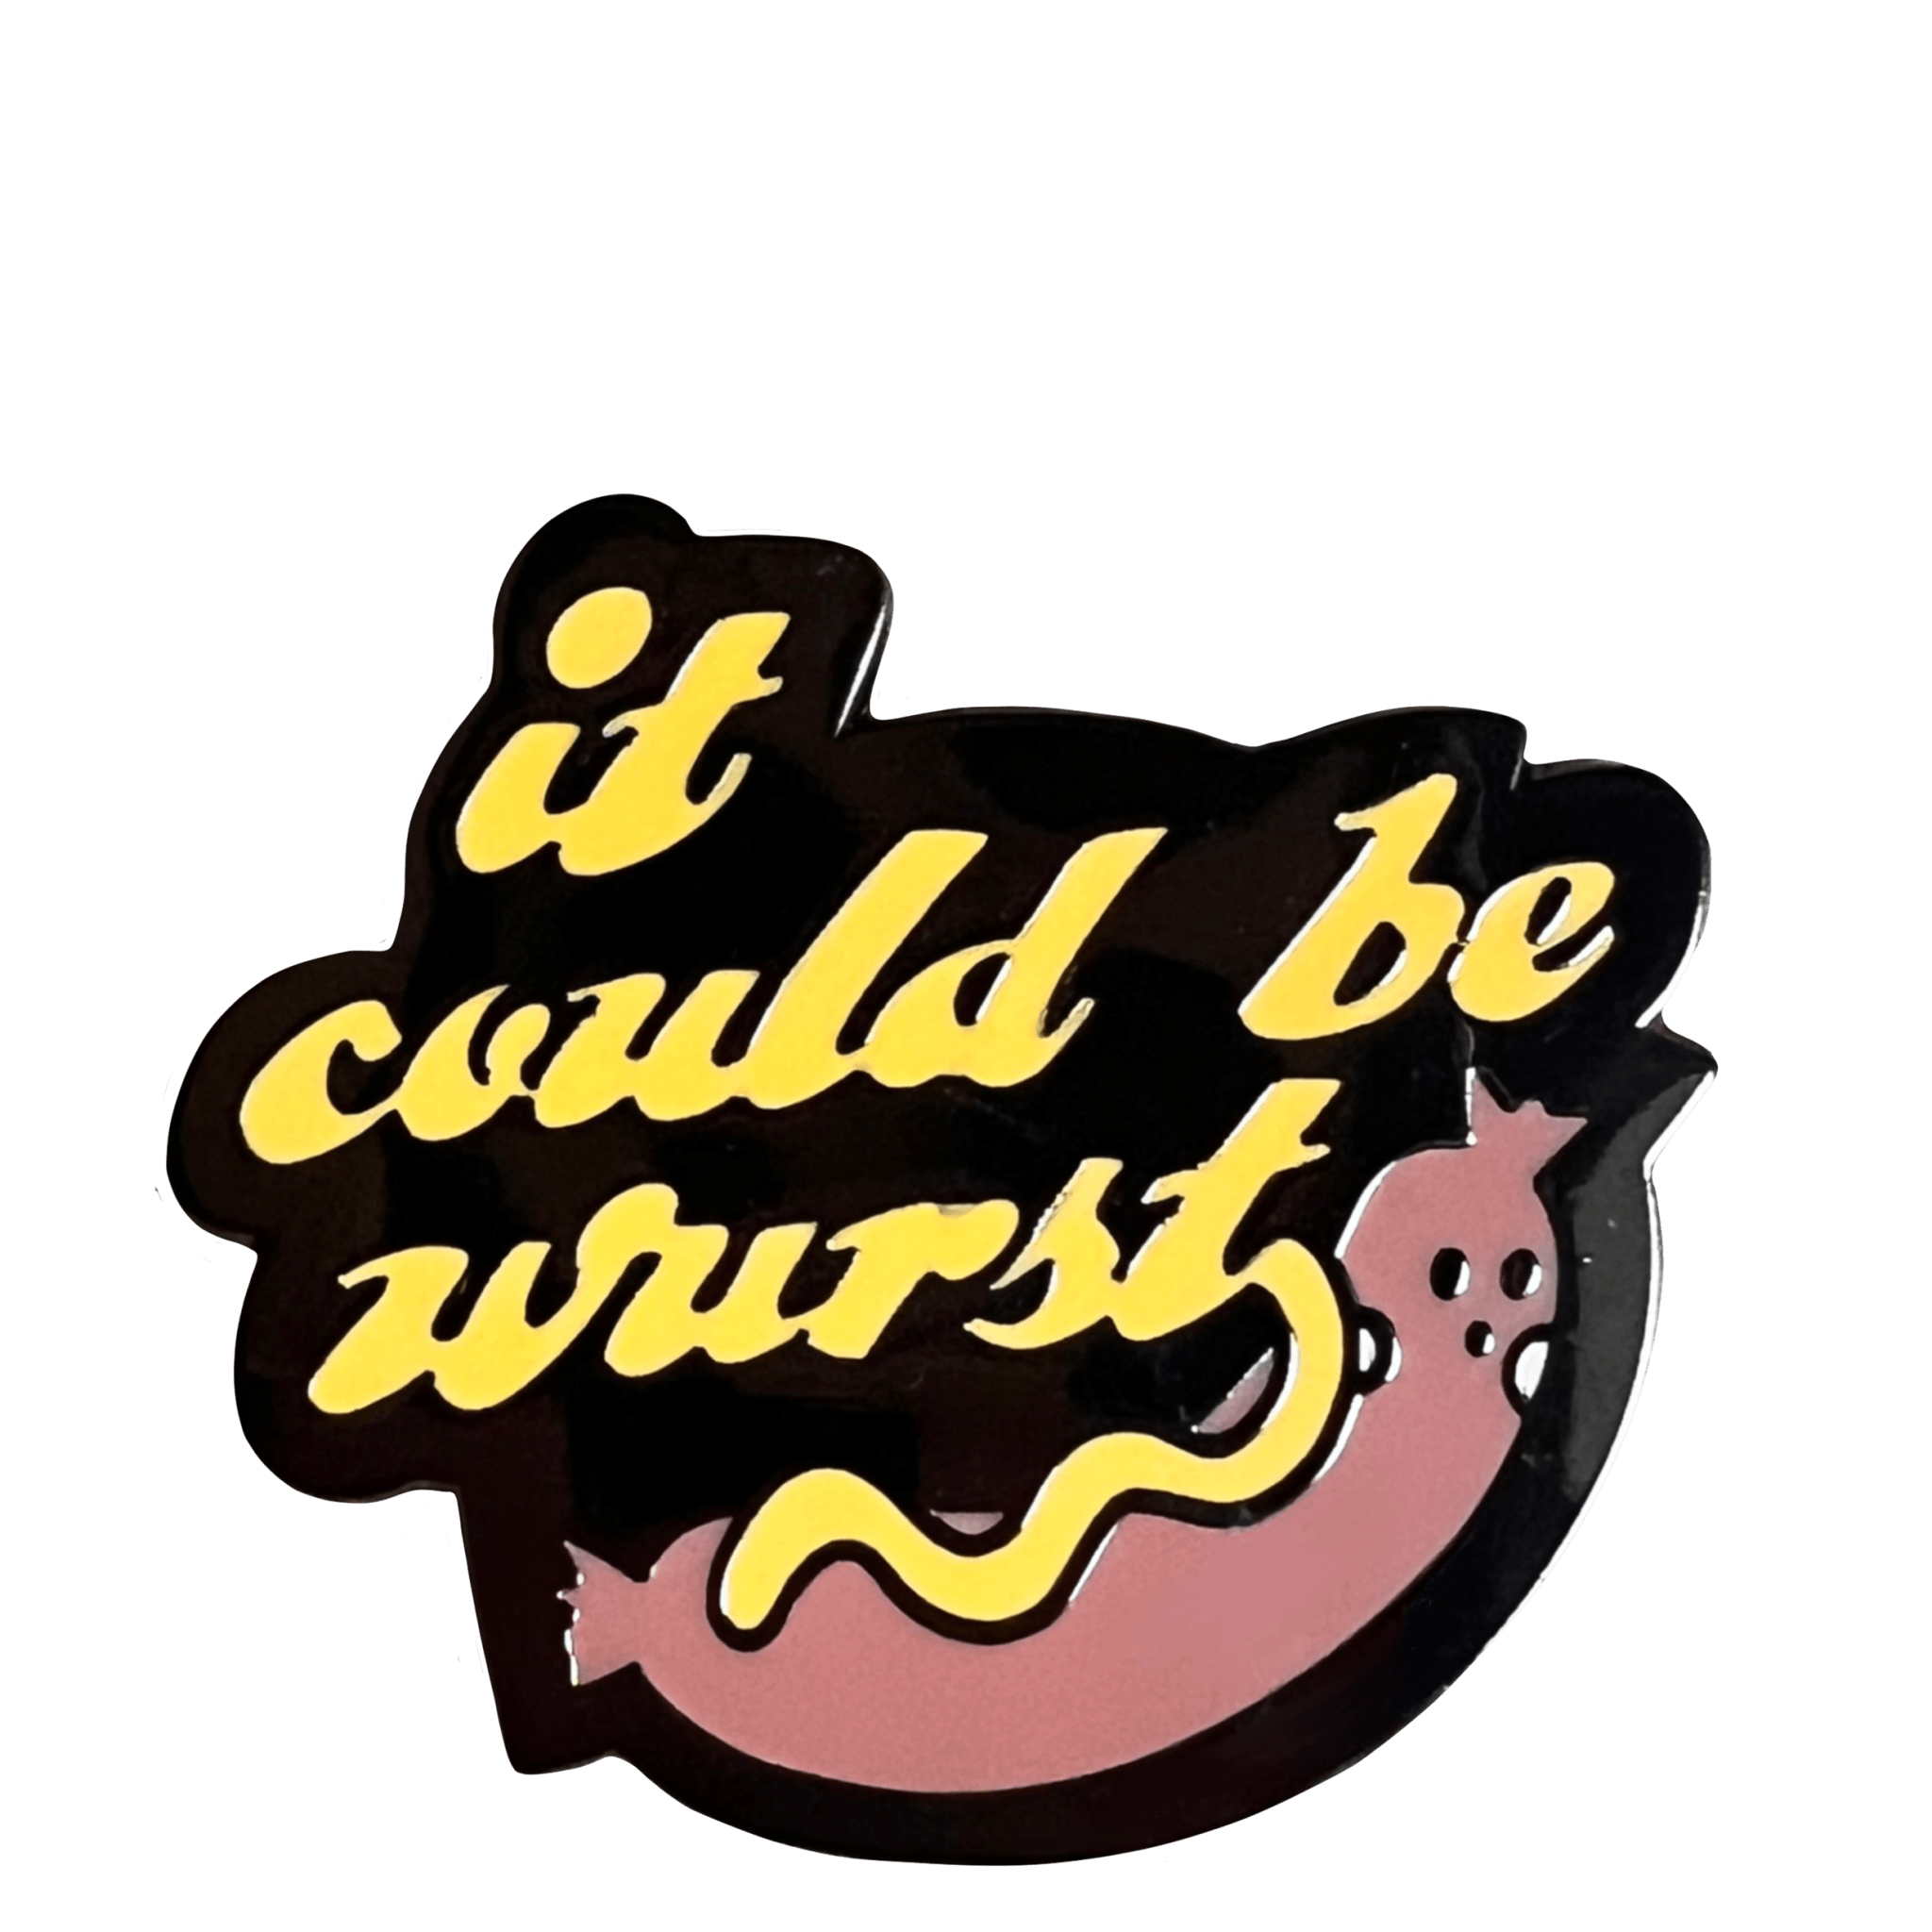 It Could Be Wurst Pin Pins by diedododa Pin